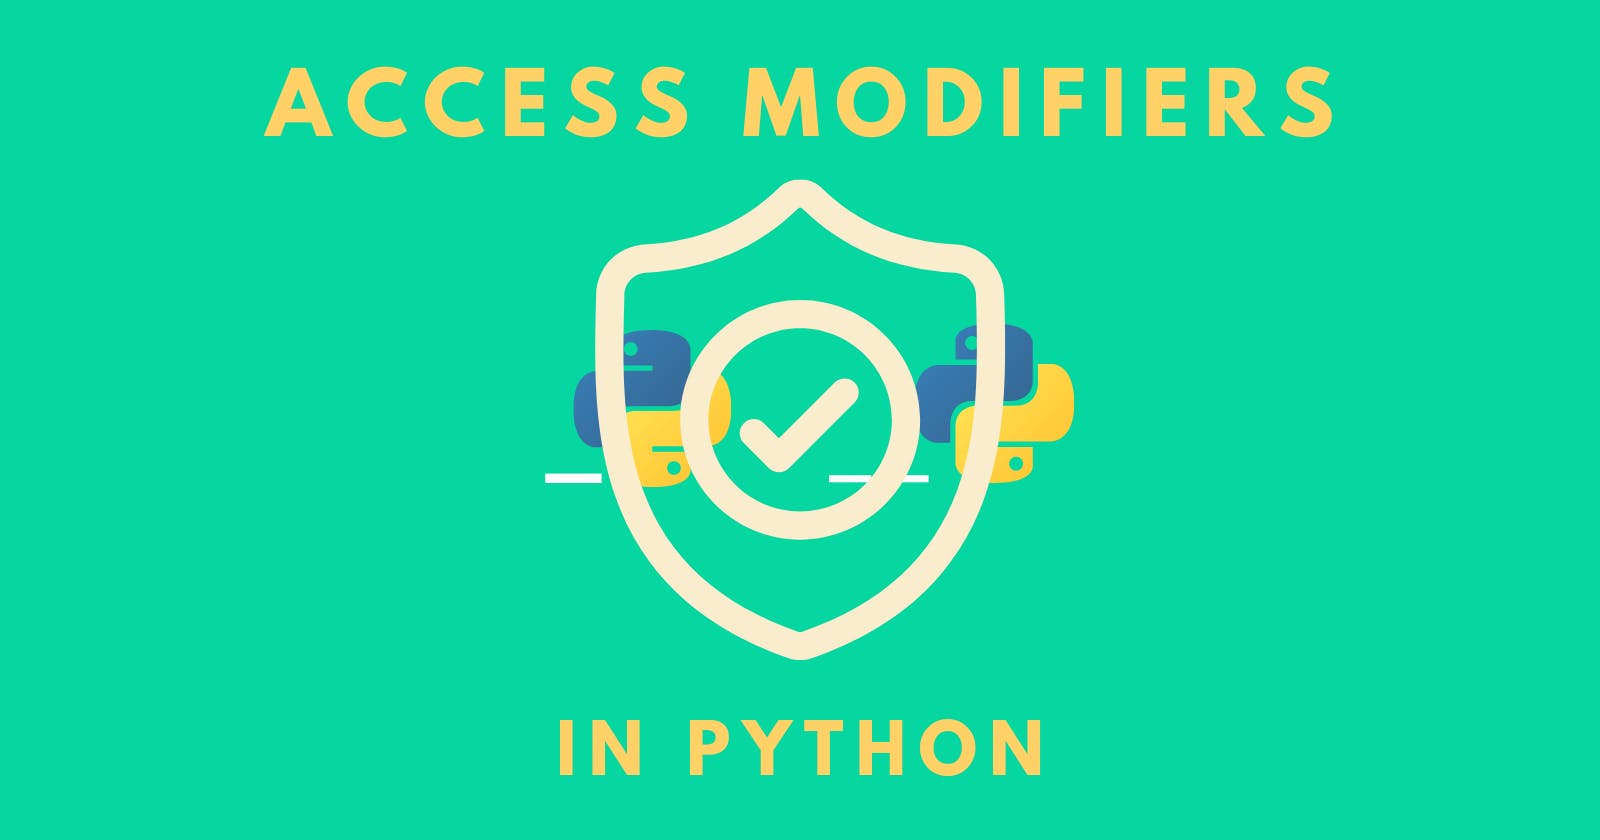 Public, Private And Protected Access Modifiers In Python